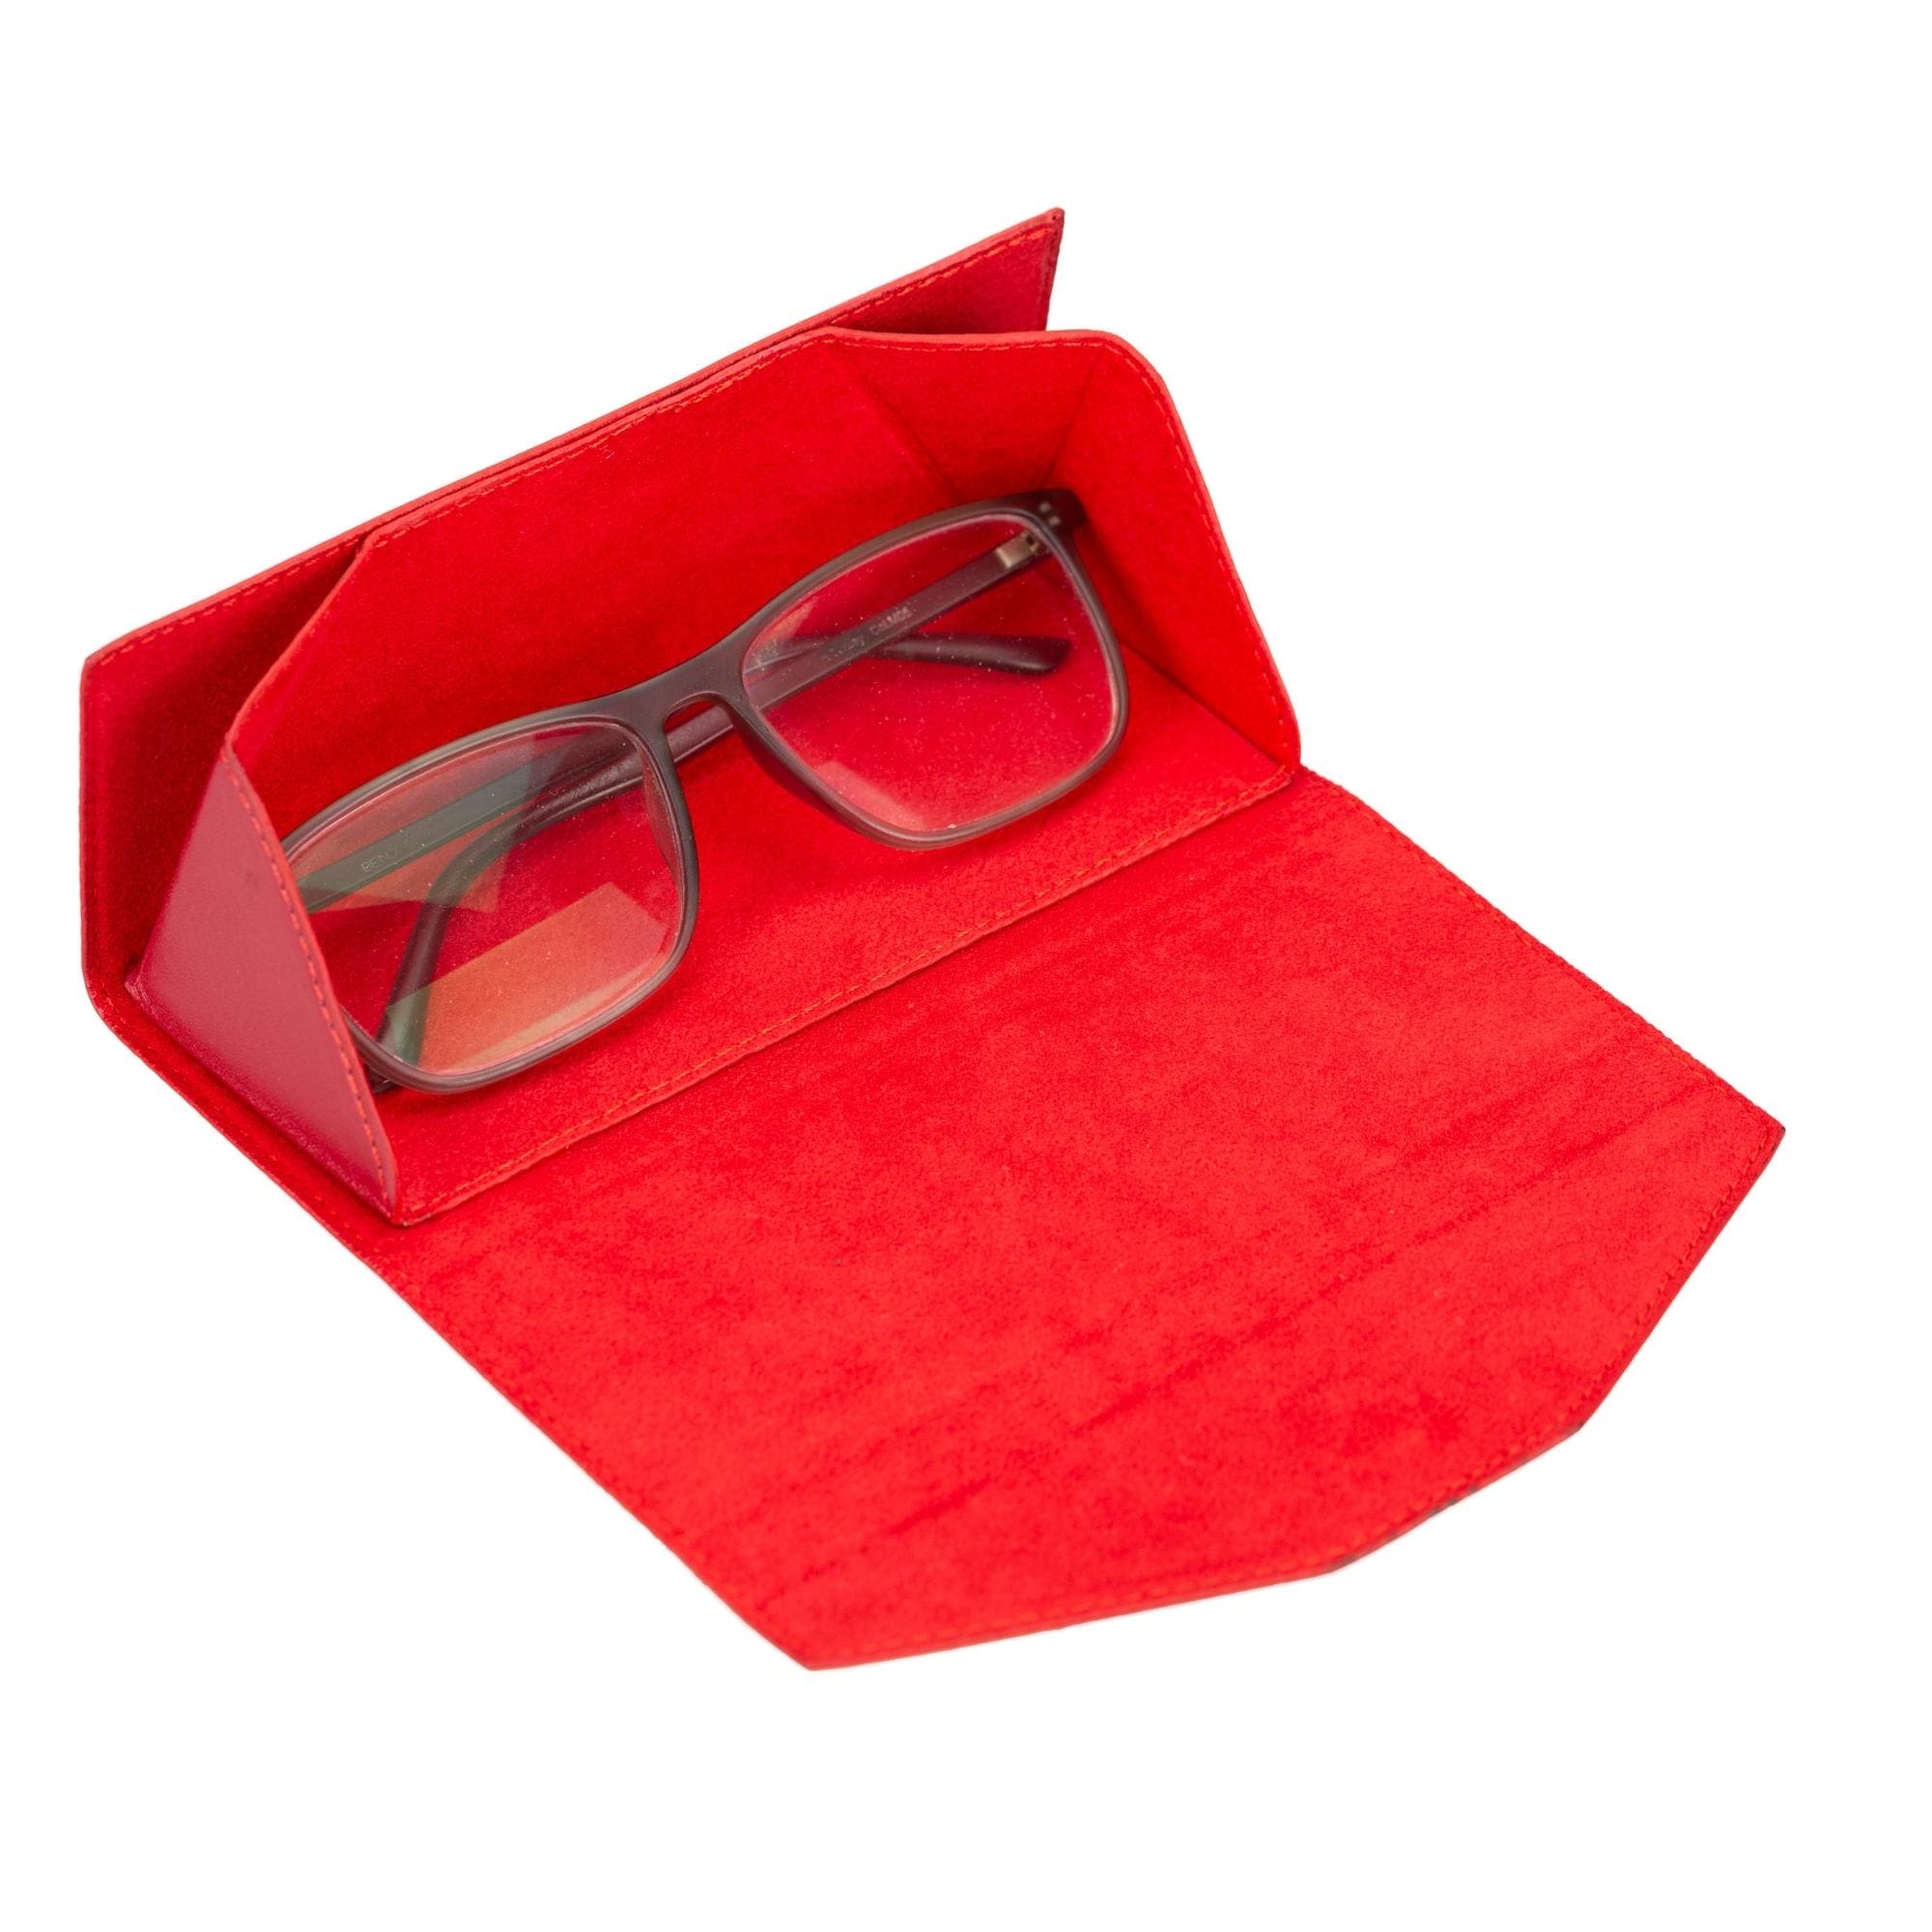 Triangle Leather Cases for Glasses and Sun Glasses - Red - TORONATA